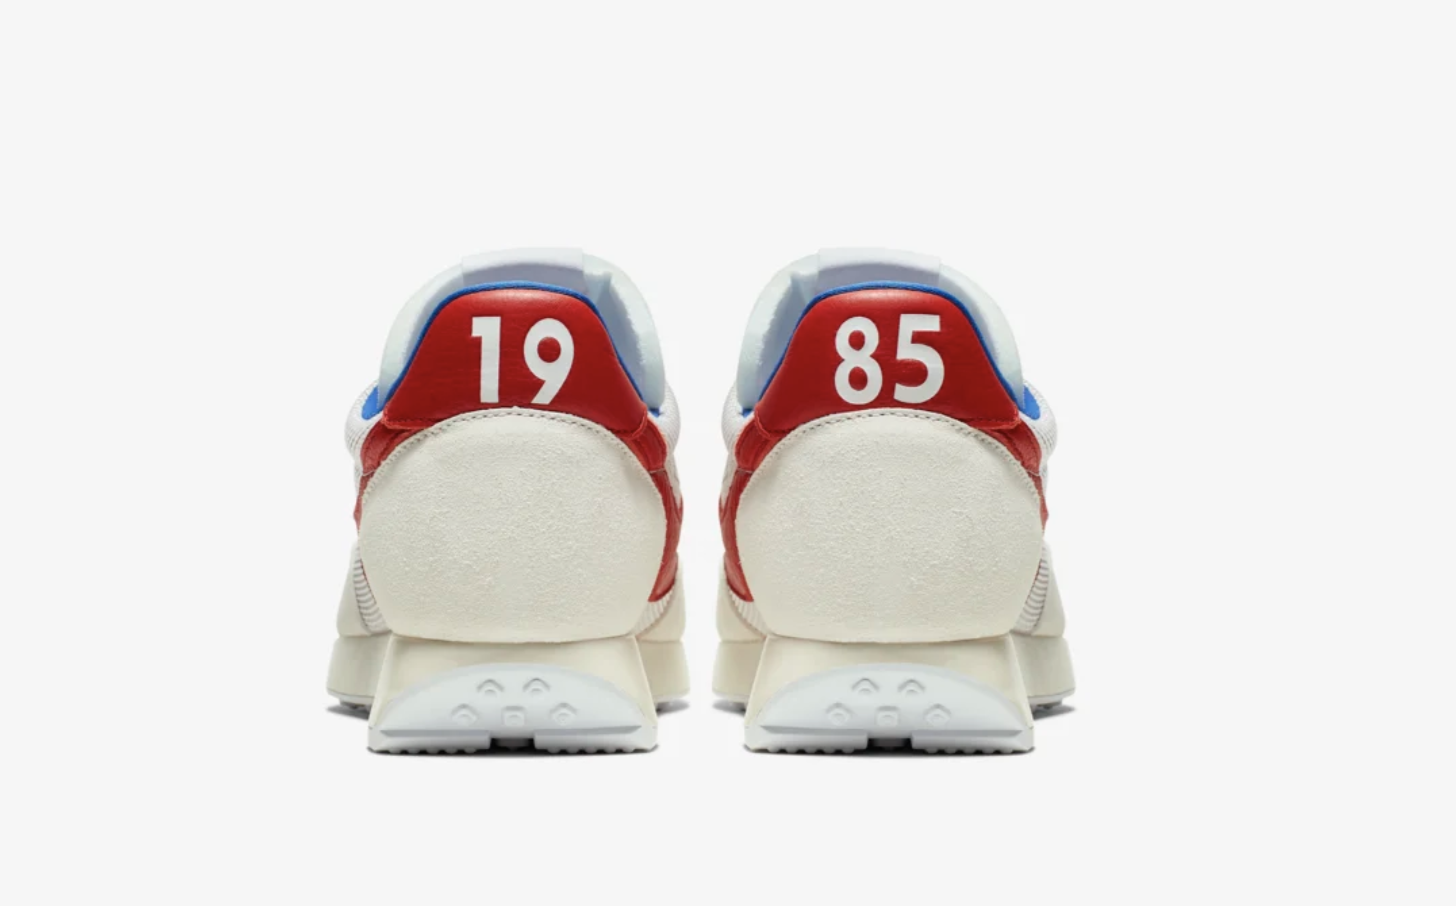 Nike 'Stranger Things' Air Tailwind '79 | Shoes